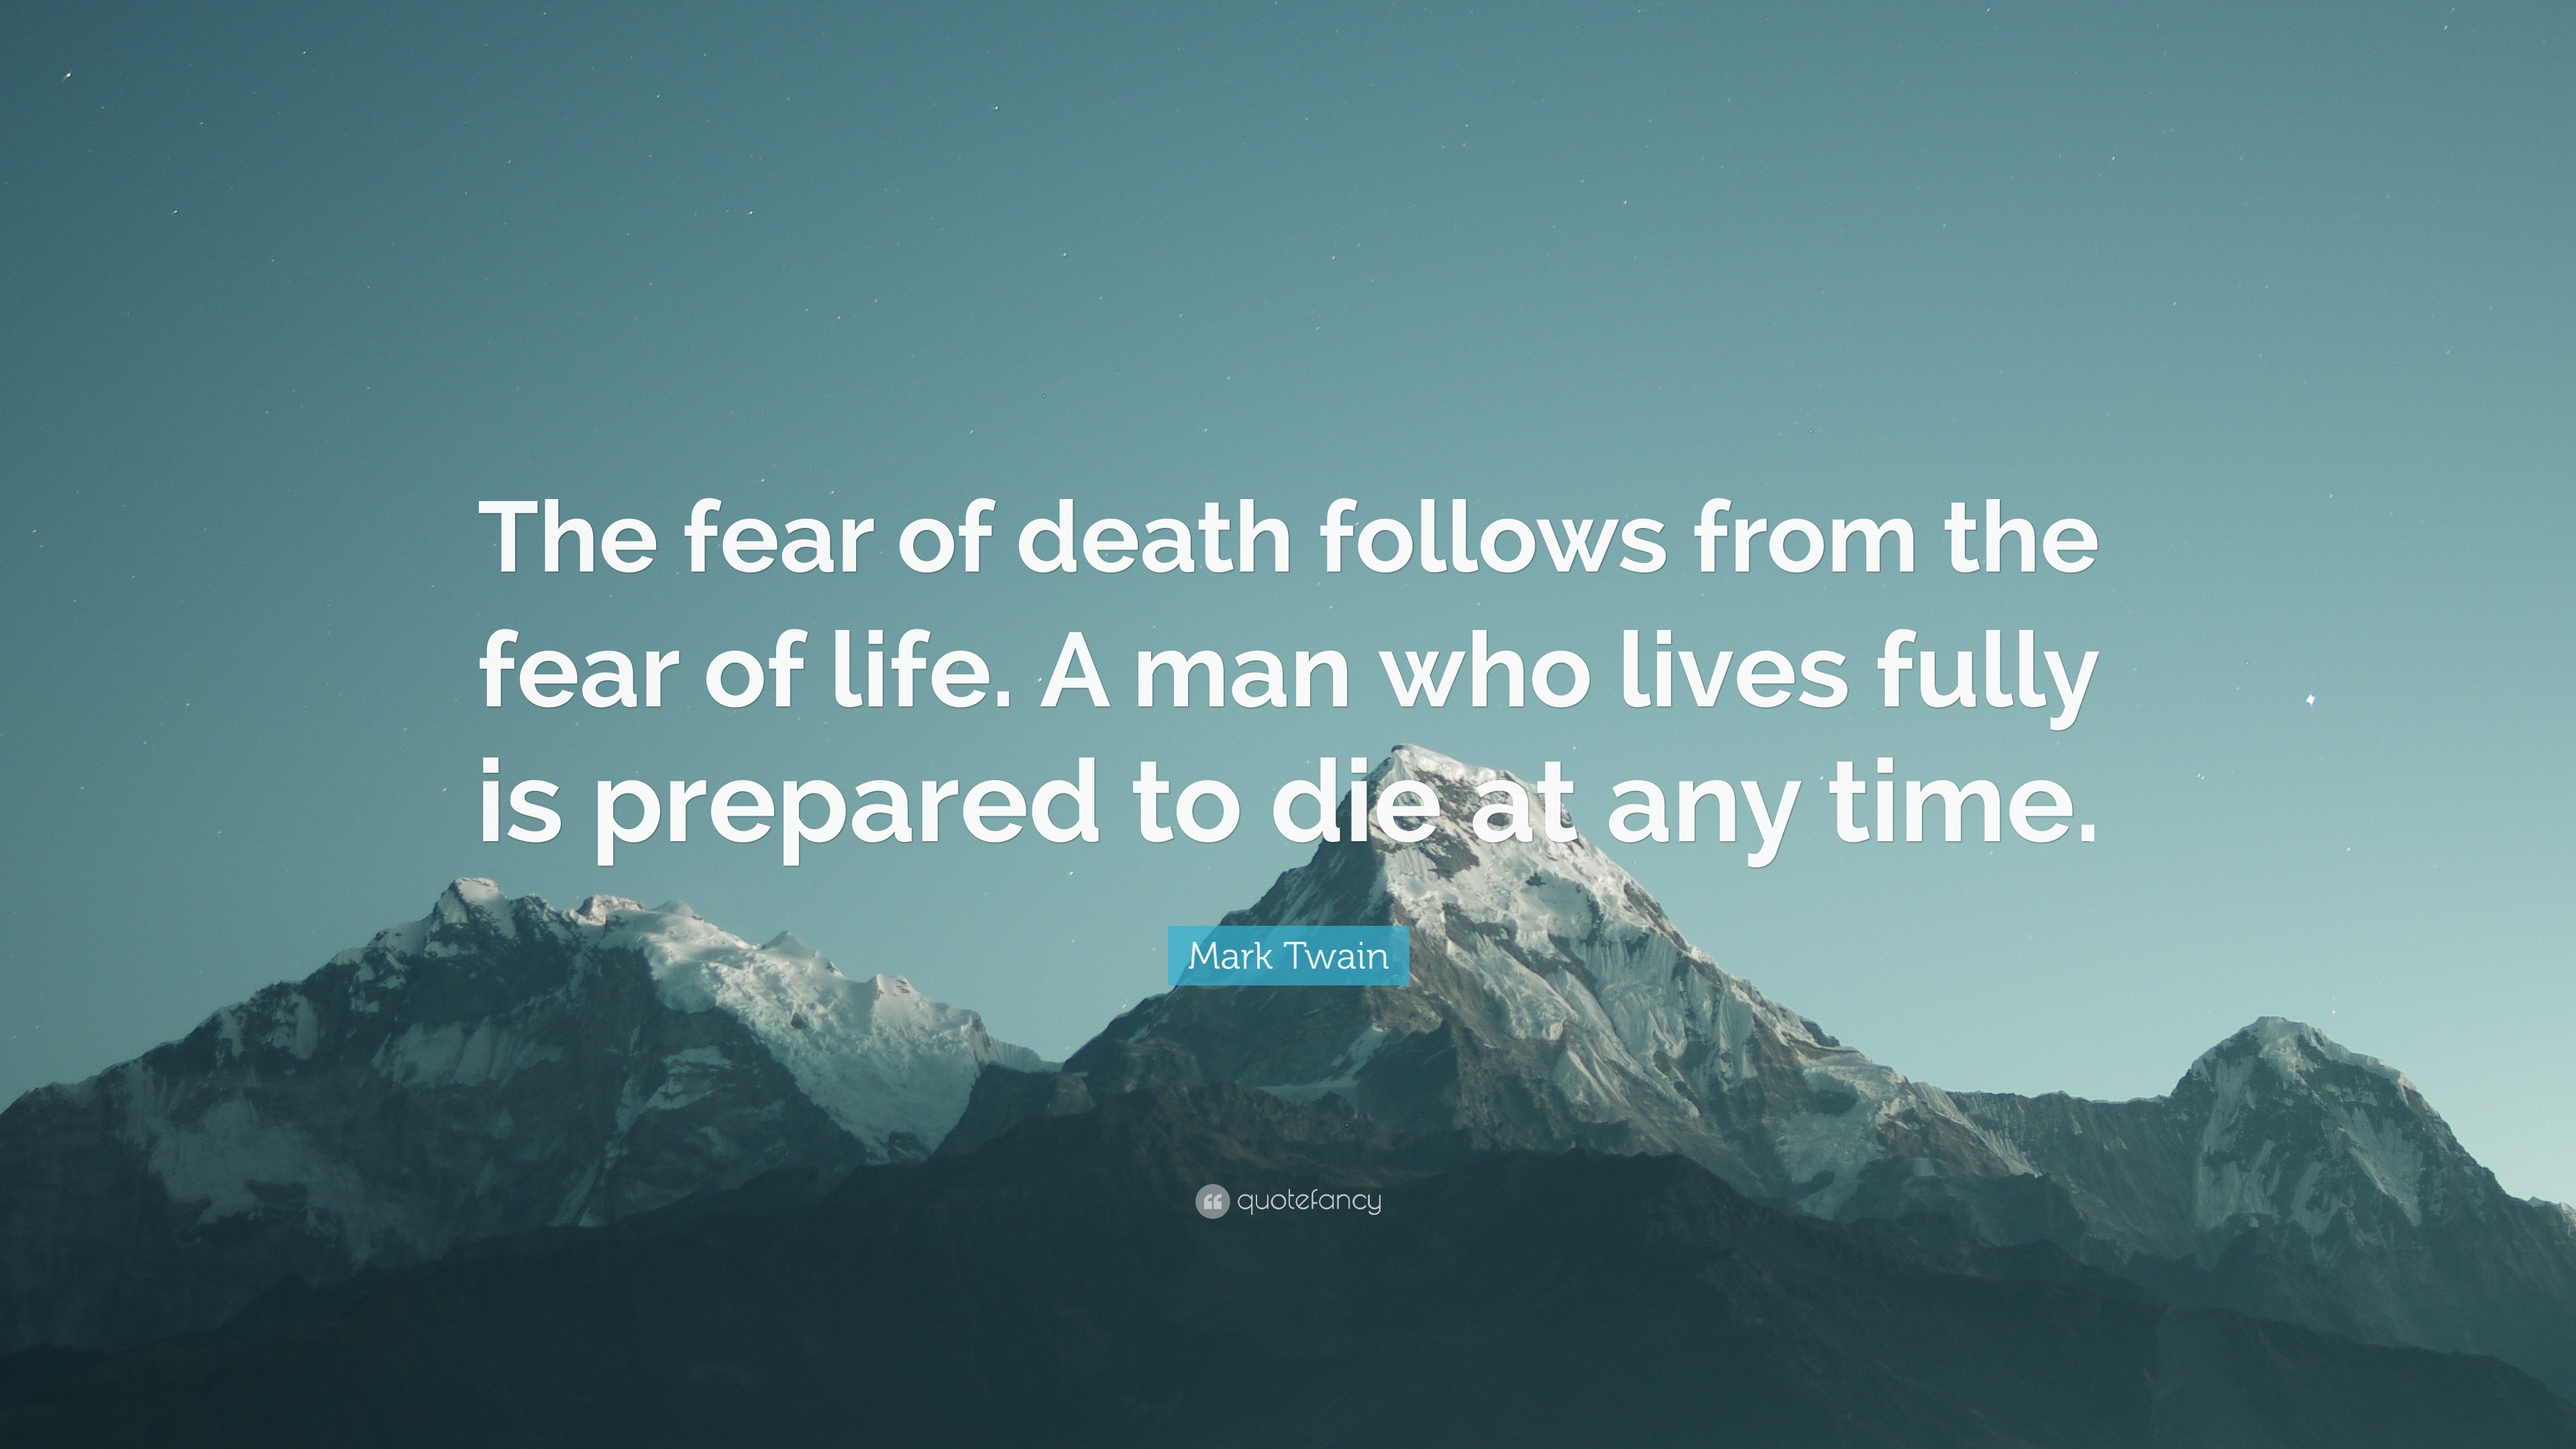 Mark Twain Quote “The fear of follows from the fear of life